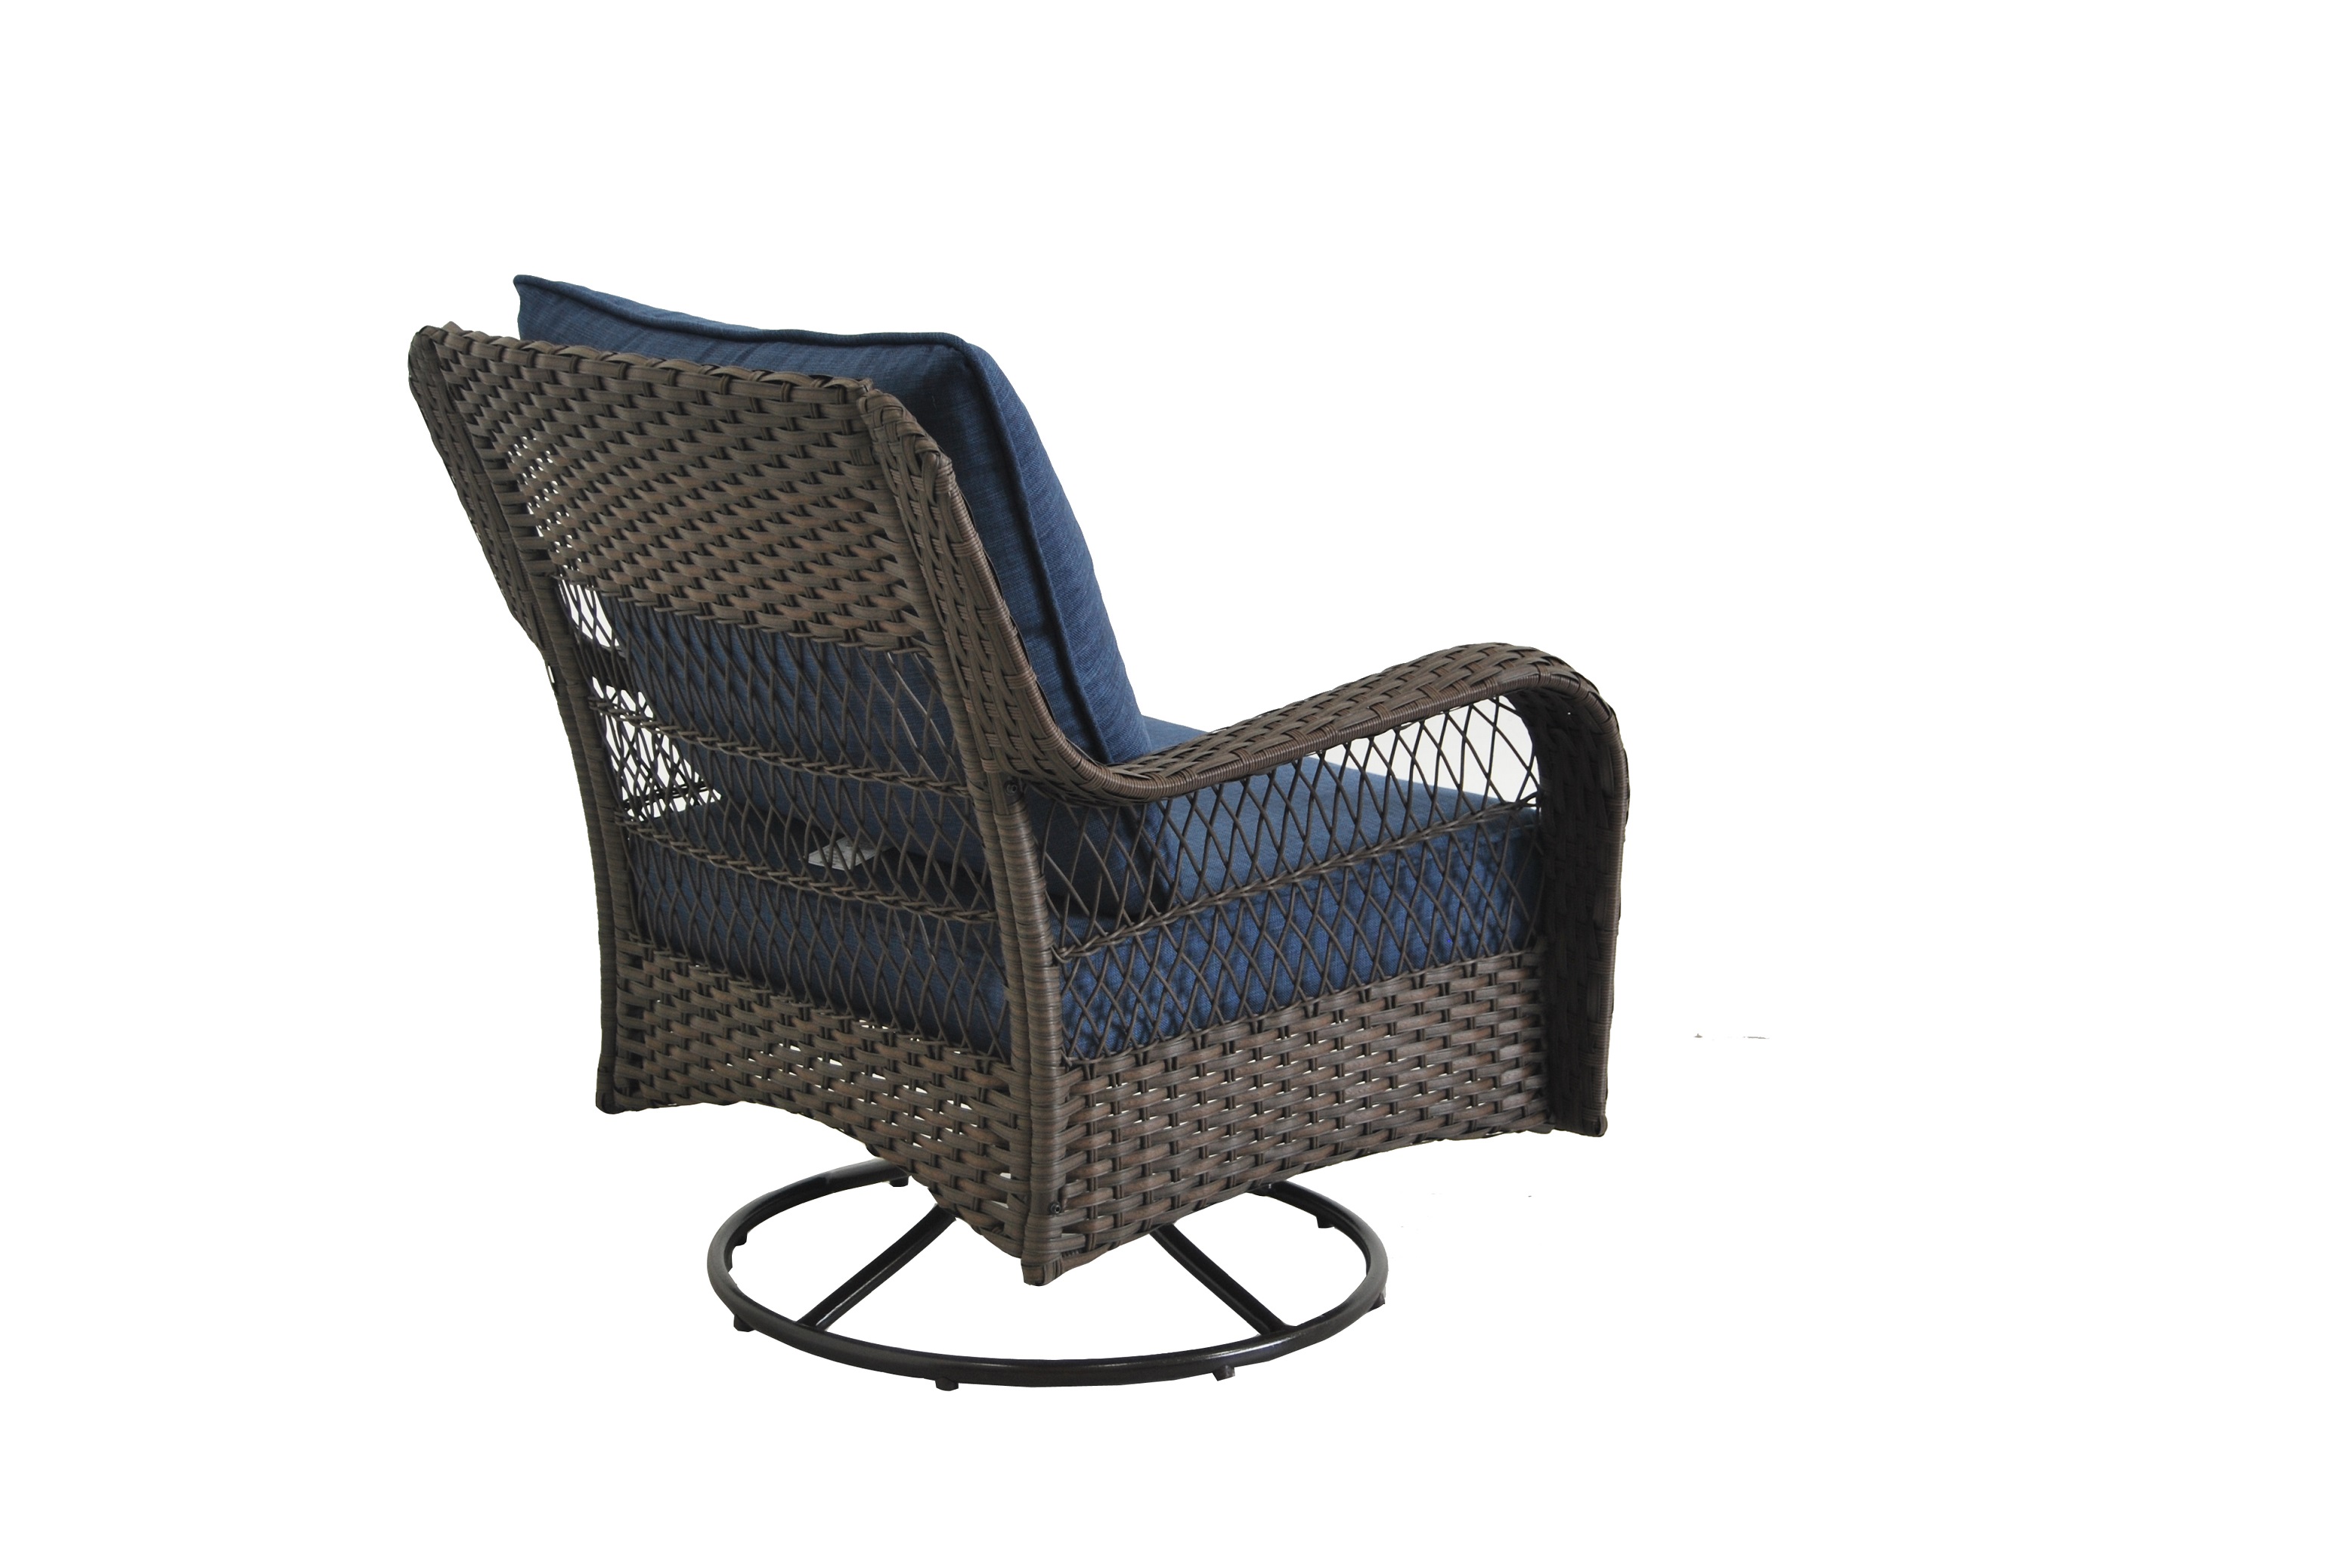 Better Homes and Gardens Outdoor Patio Furniture Colebrook 3 Piece Blue Chat set - image 3 of 7